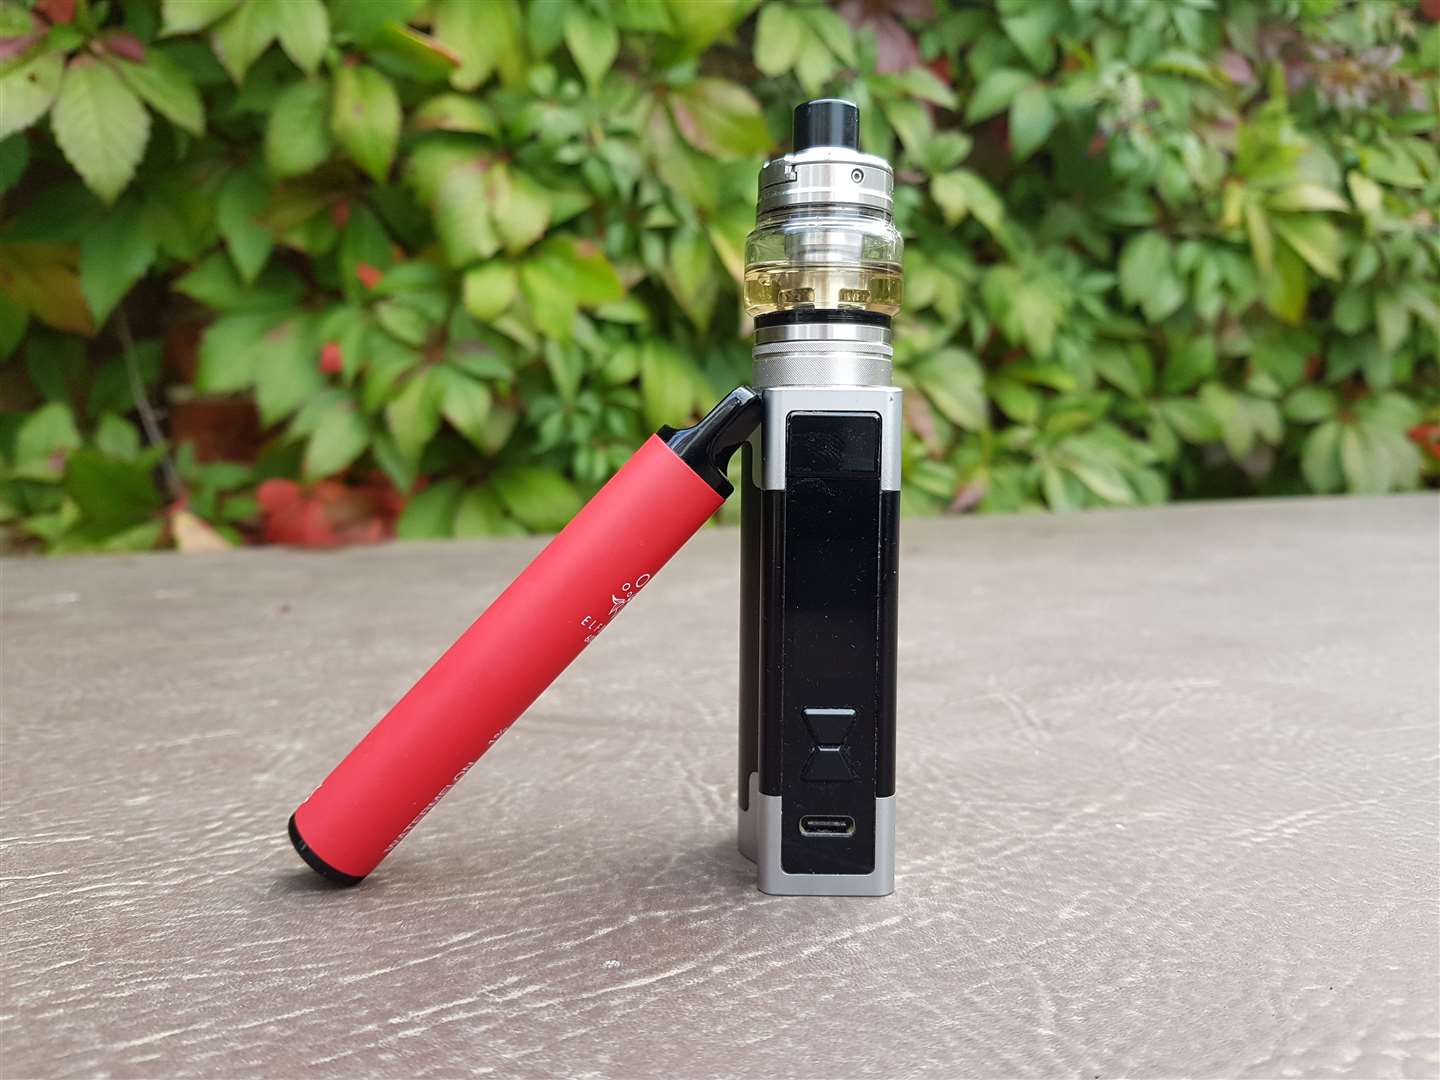 The traditional tank vape device - with the new breed of disposable leaning against it